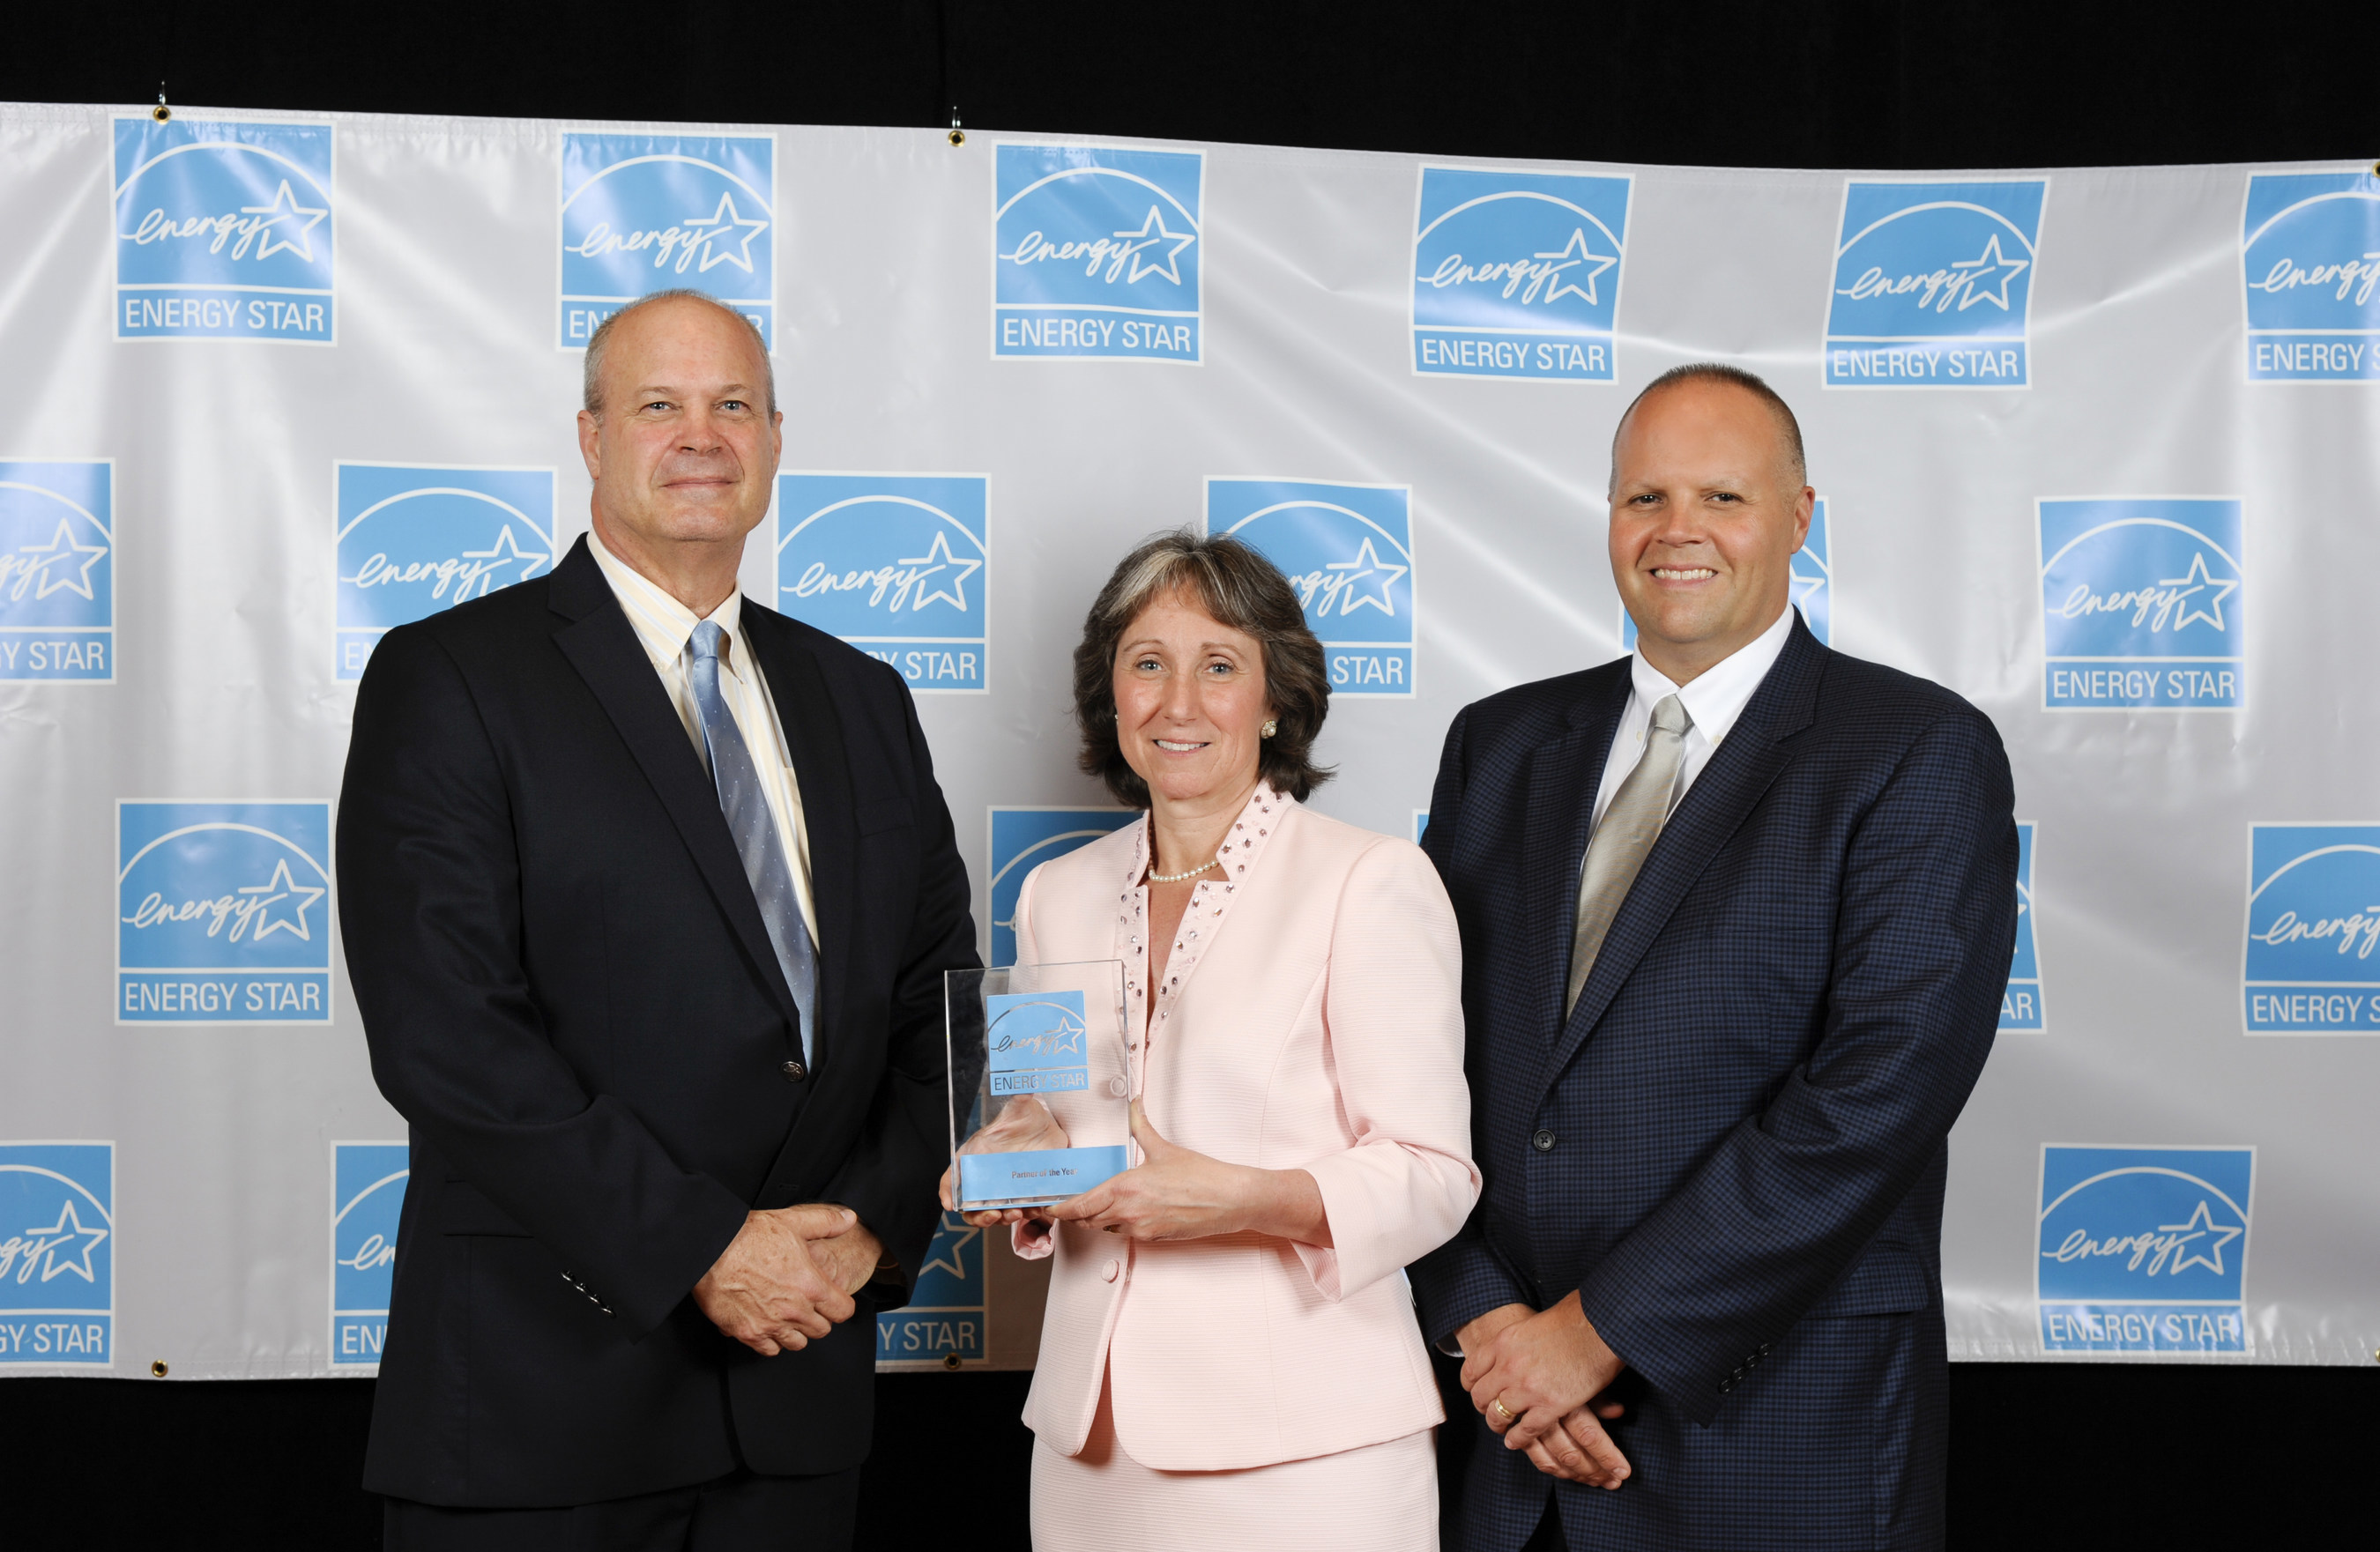 Jean Lupinacci, Acting Director of the Climate Protection Partnerships Division, center, of the U.S. Environmental Protection Agency presents Dave Bell, VP of Building Science, left, and Robert Buck, President, right, of TopBuild with a 2015 ENERGY STAR Partner of the Year - Home Energy Rater Award.